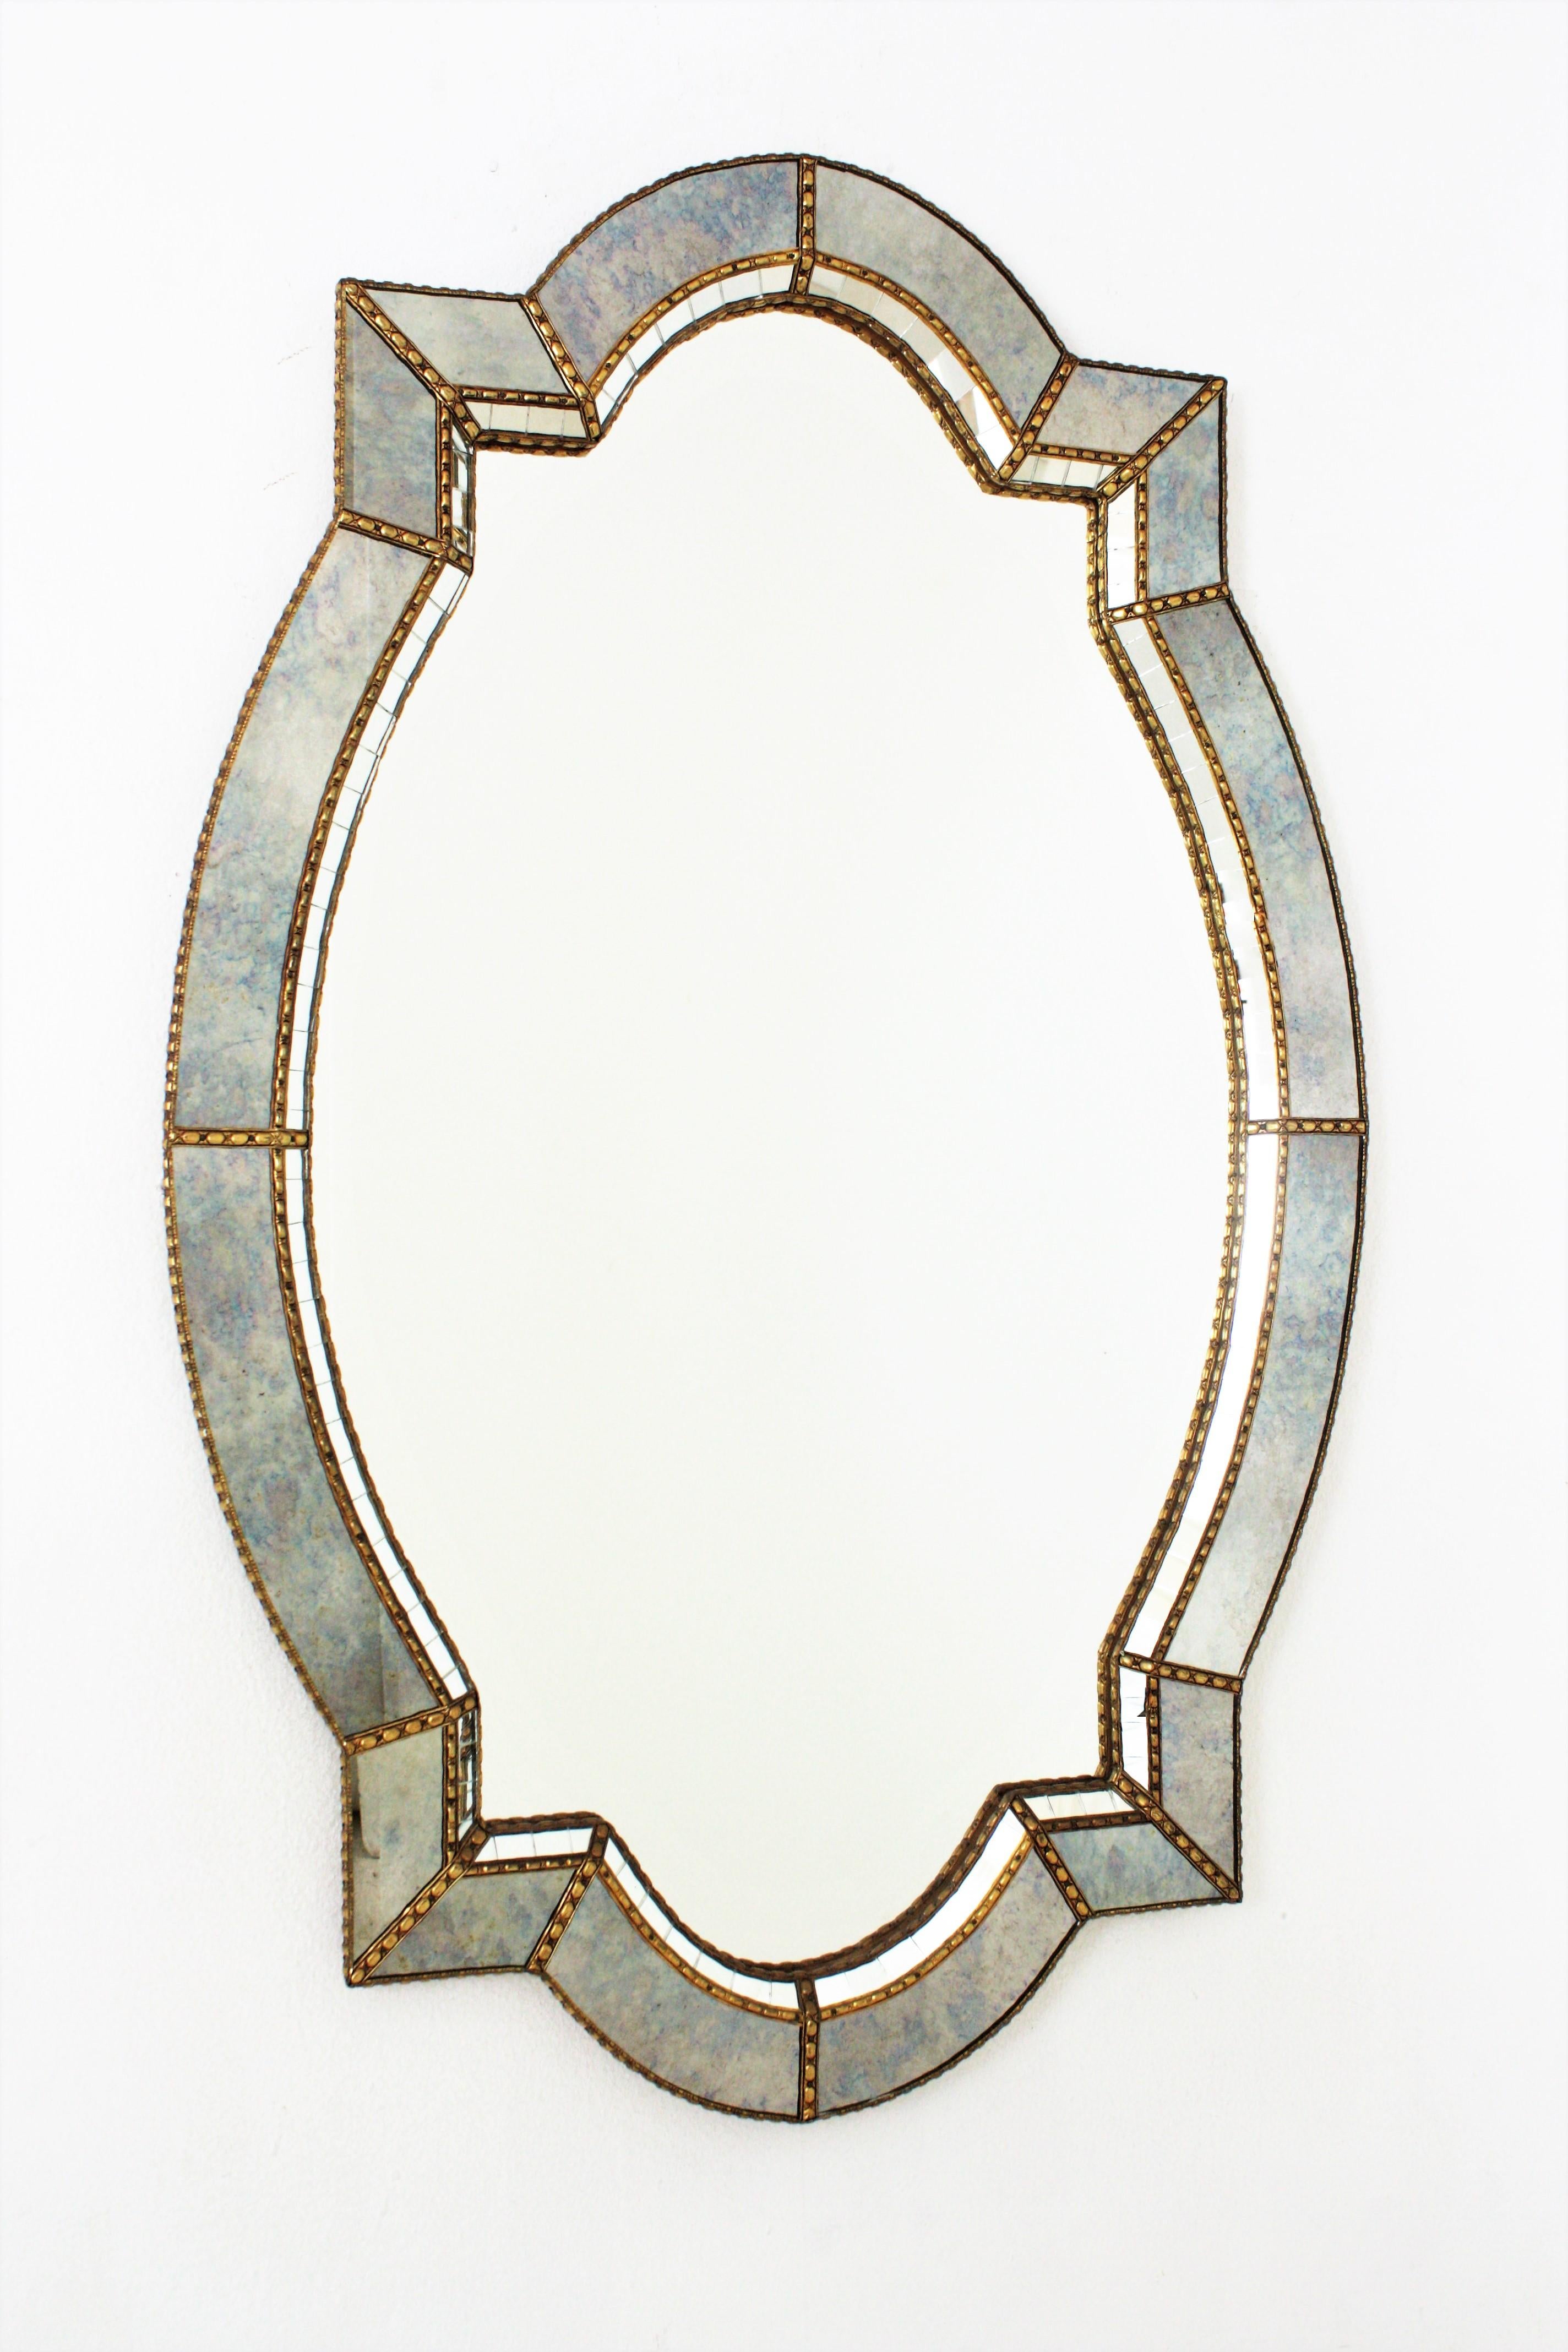 Elegant venetian style Hollywood Regency wall mirror with iridiscent blue glass frame. Spain, 1960s.
This glamorous mirror featuring a double layered elongated quatrefoil mirror. The frame is made of brass with two layers of decorative paneled